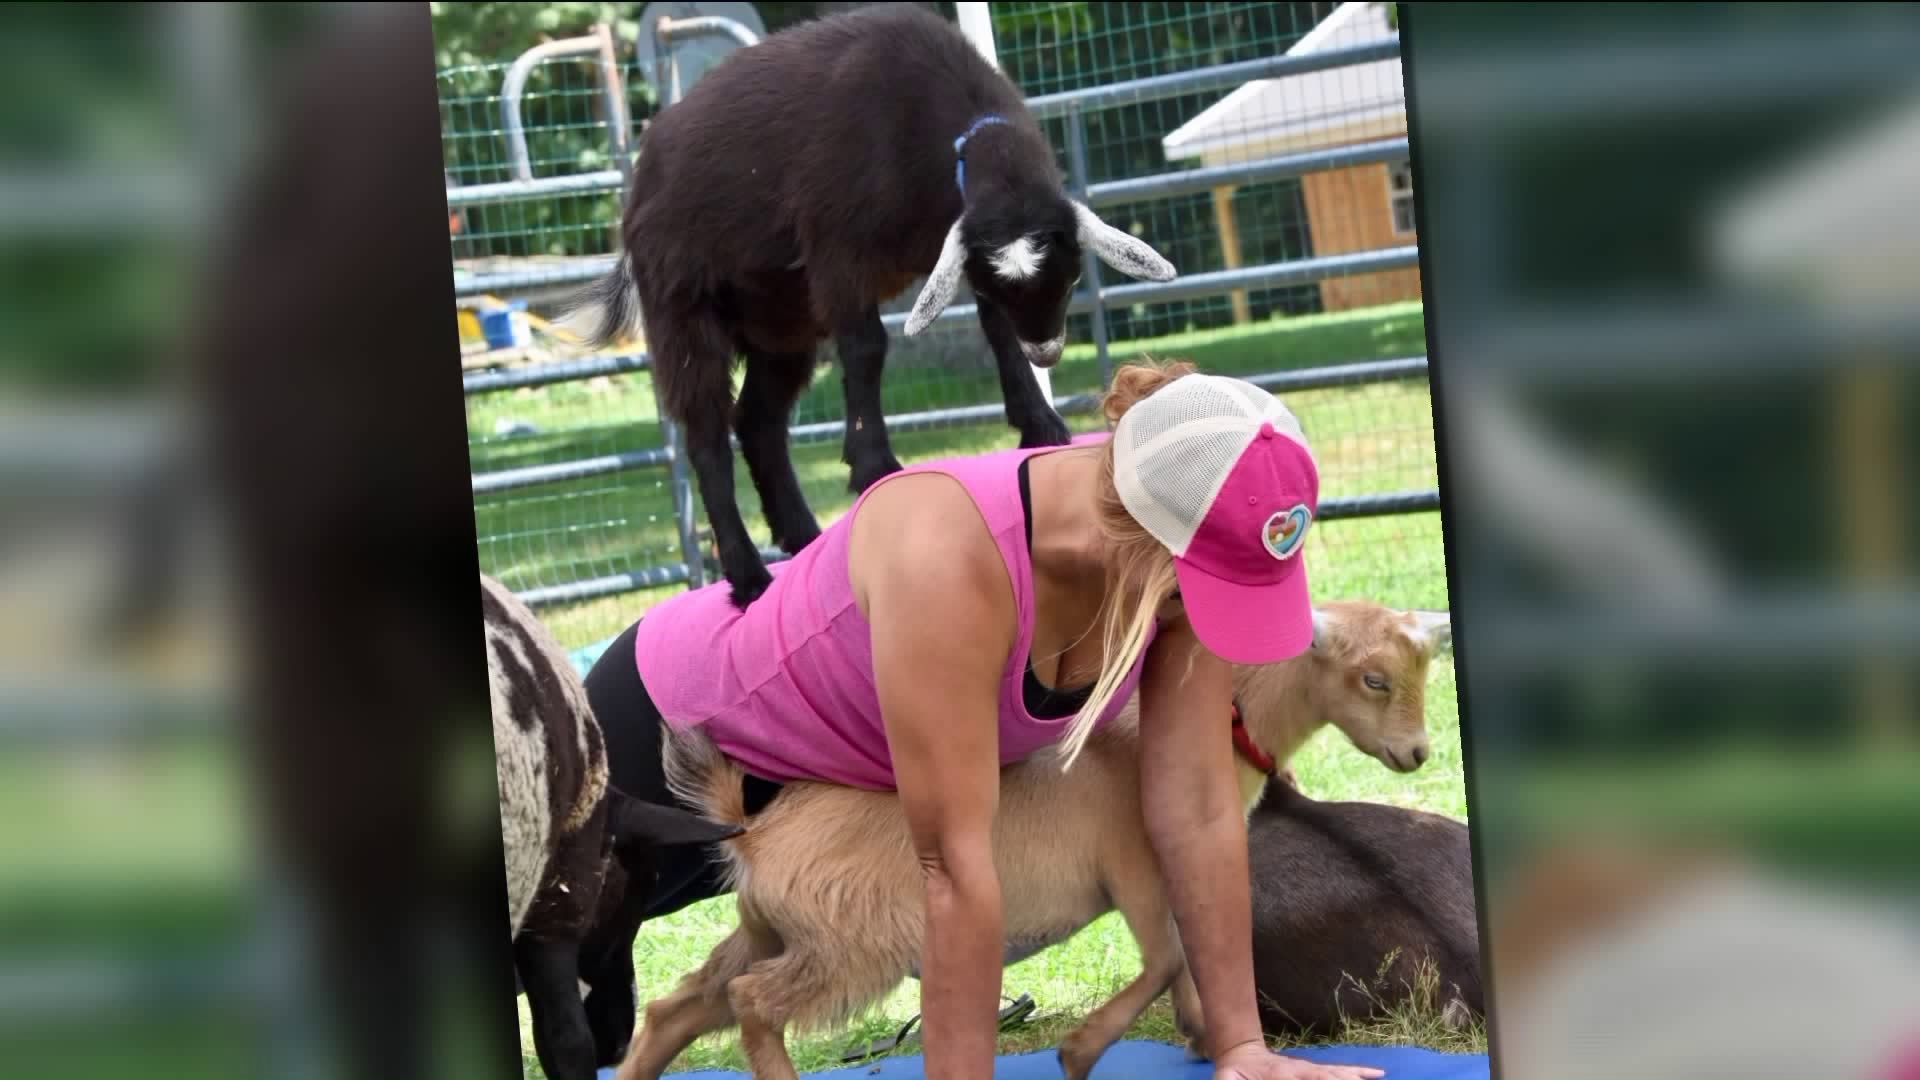 Town moves to shut down goat yoga in Manchester